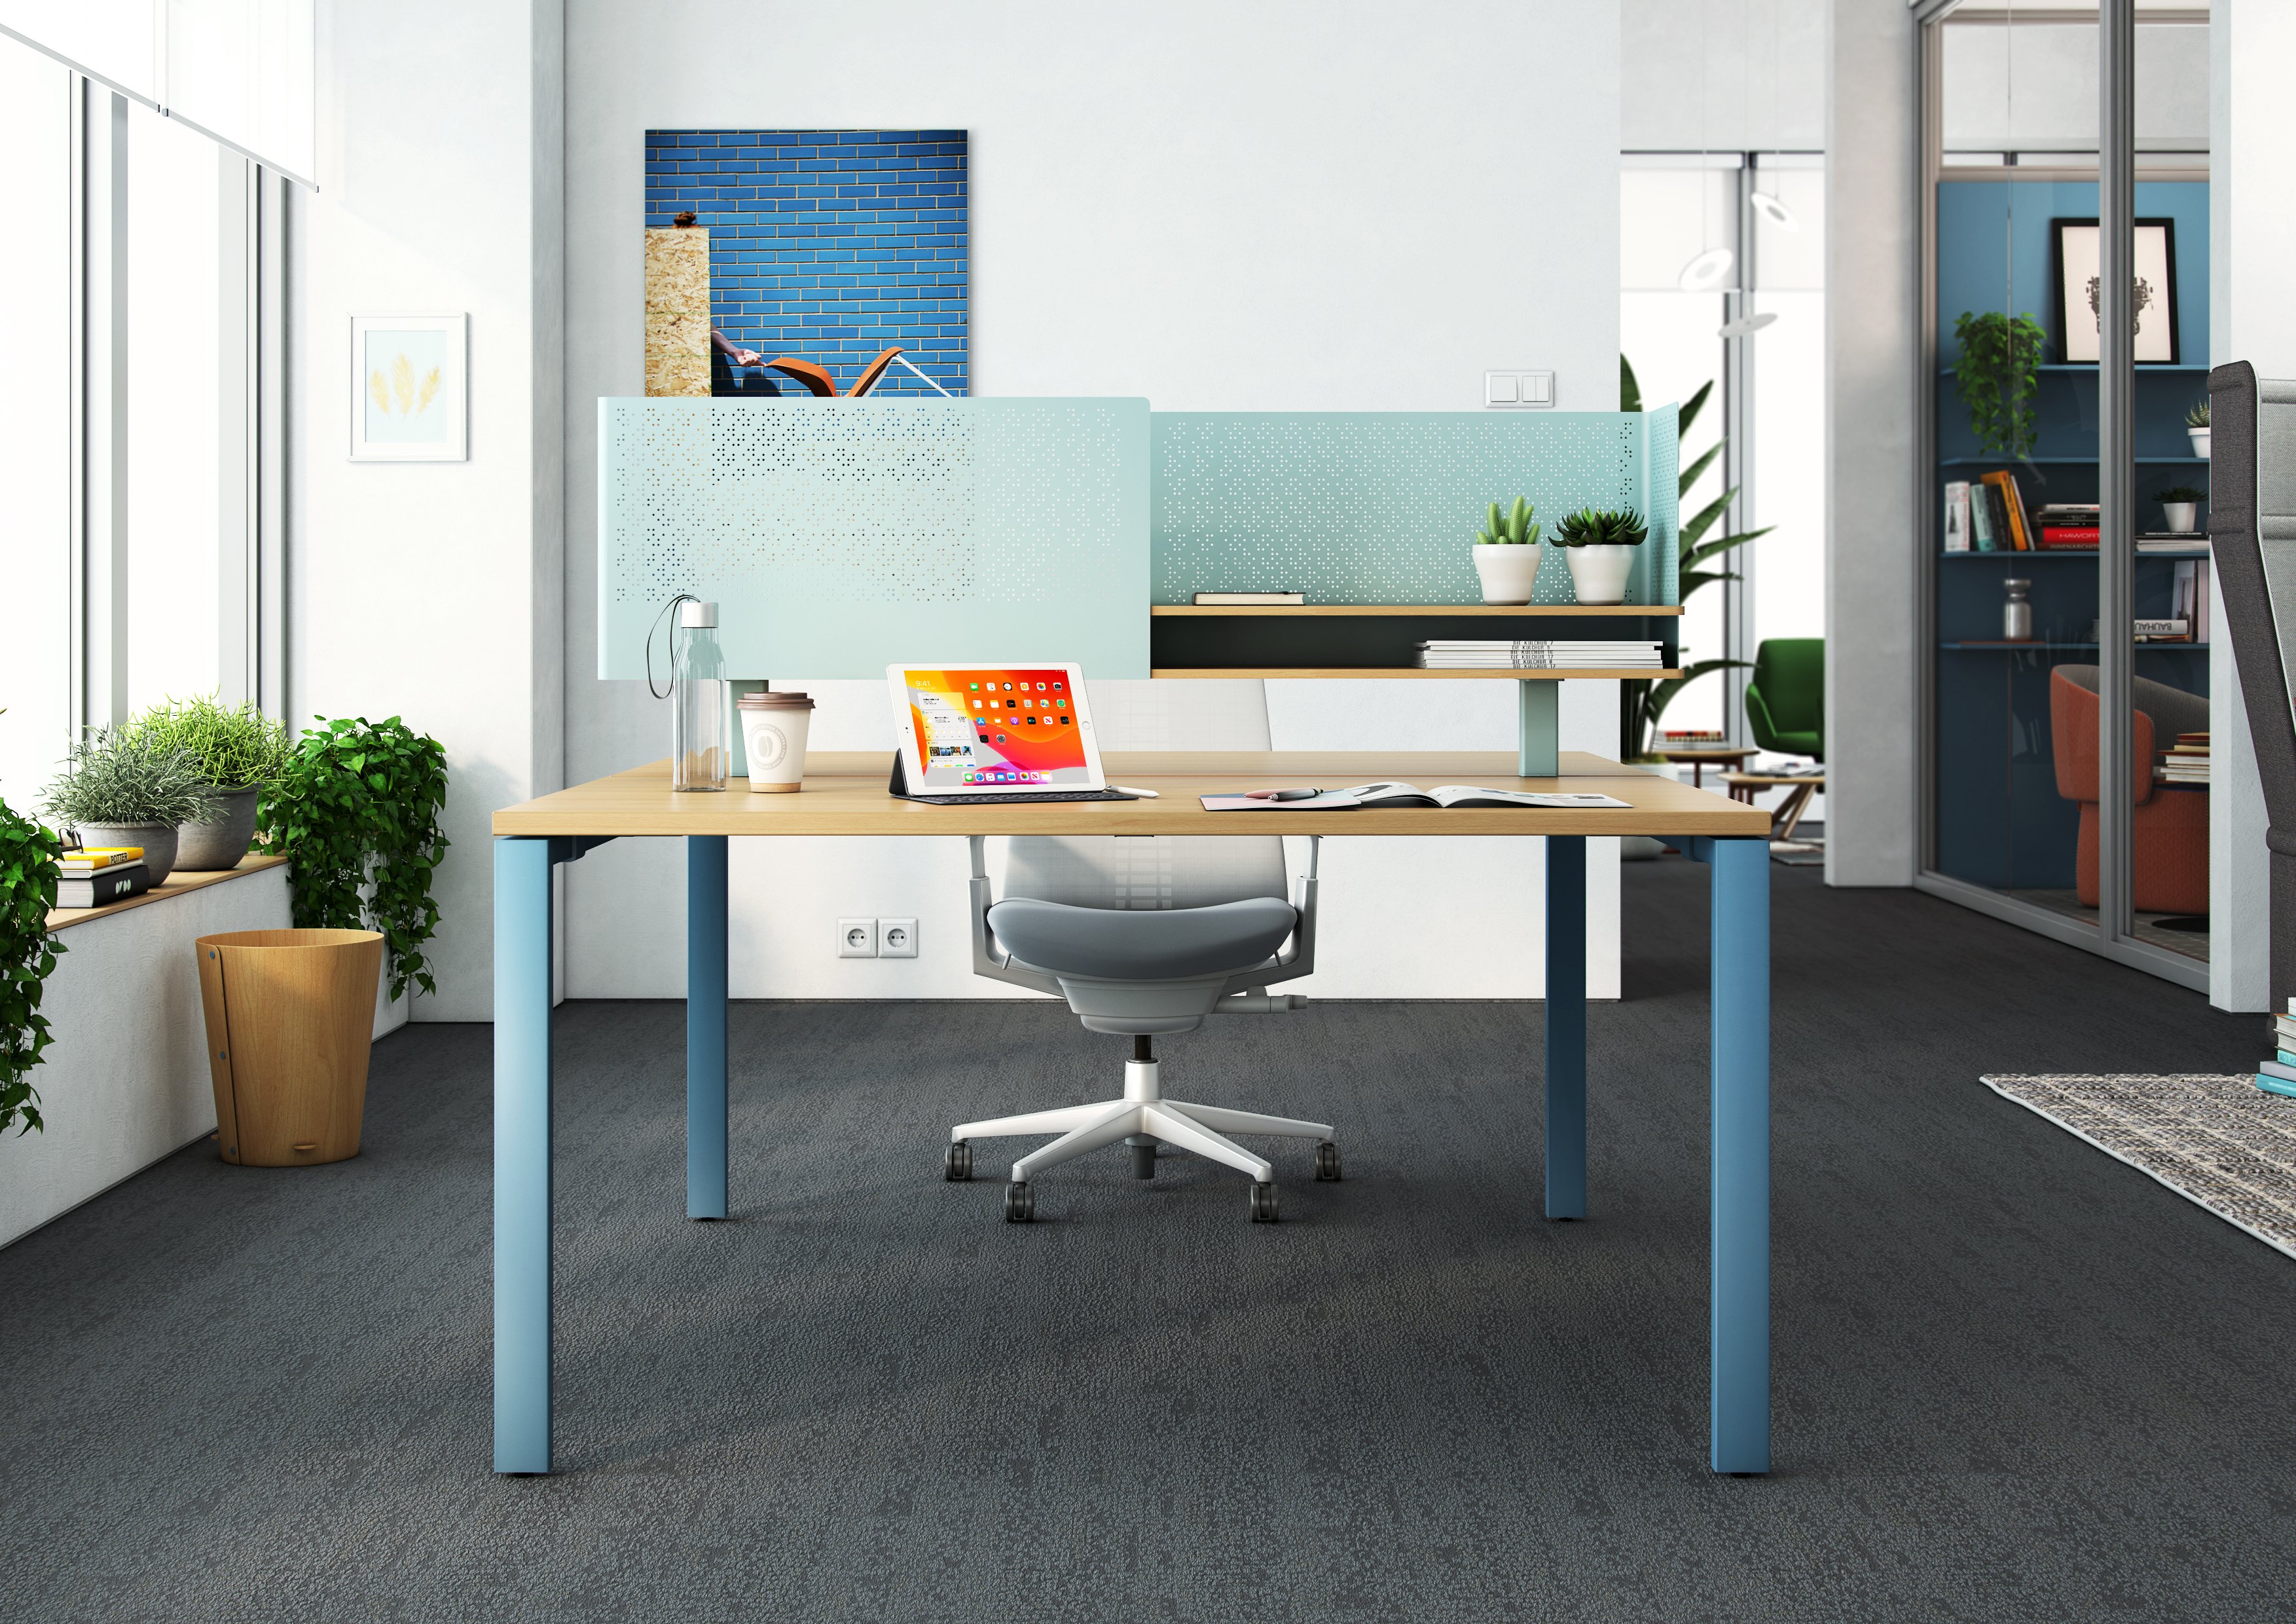 Active Components work space with personal shelving divider in blue